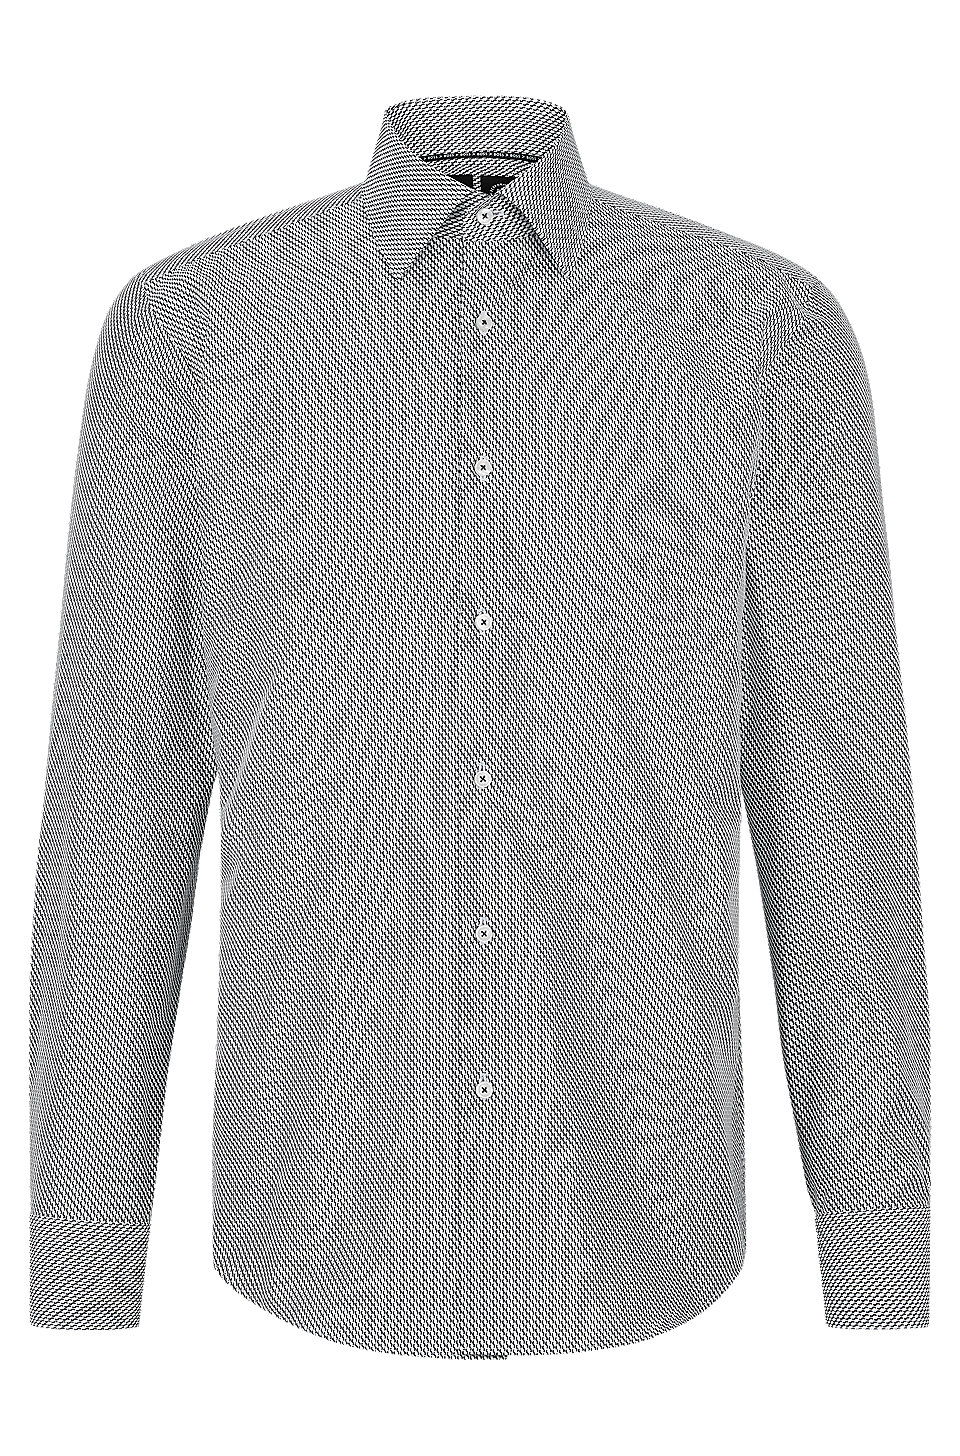 BOSS - Slim-fit shirt in structured and printed stretch cotton